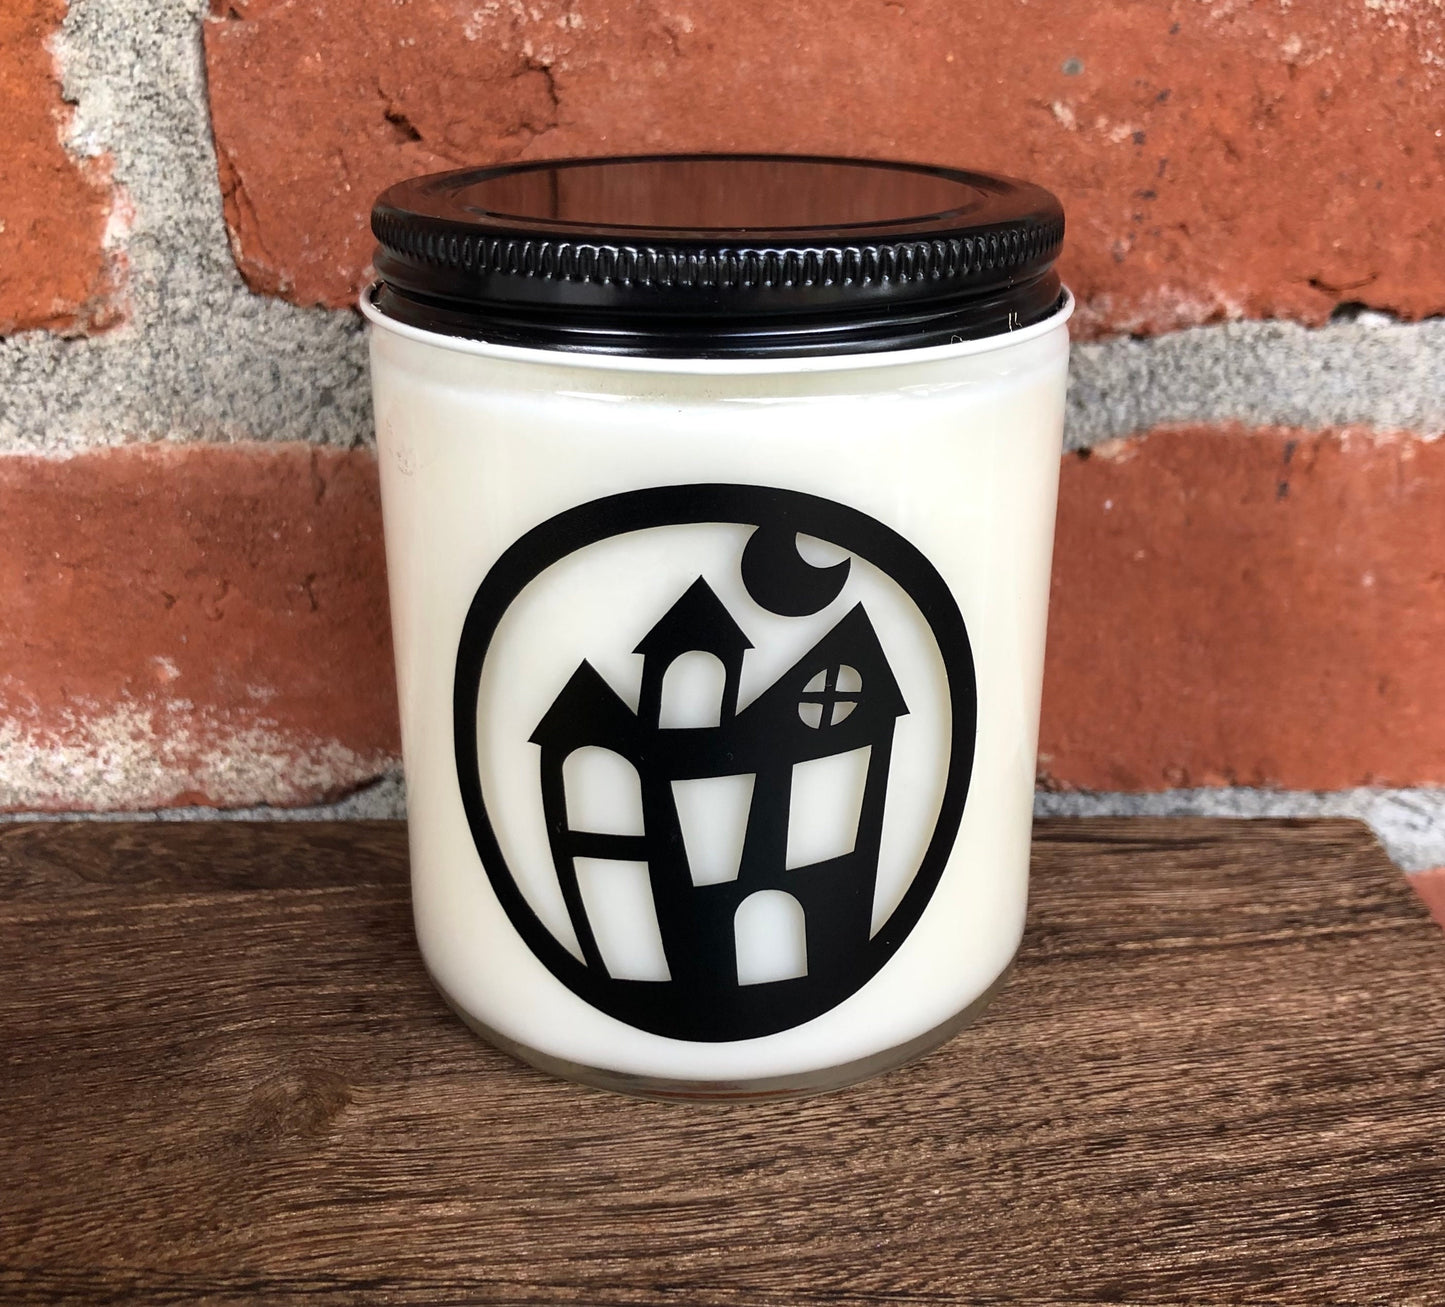 PDX Flower Power " Haunted House Candle"